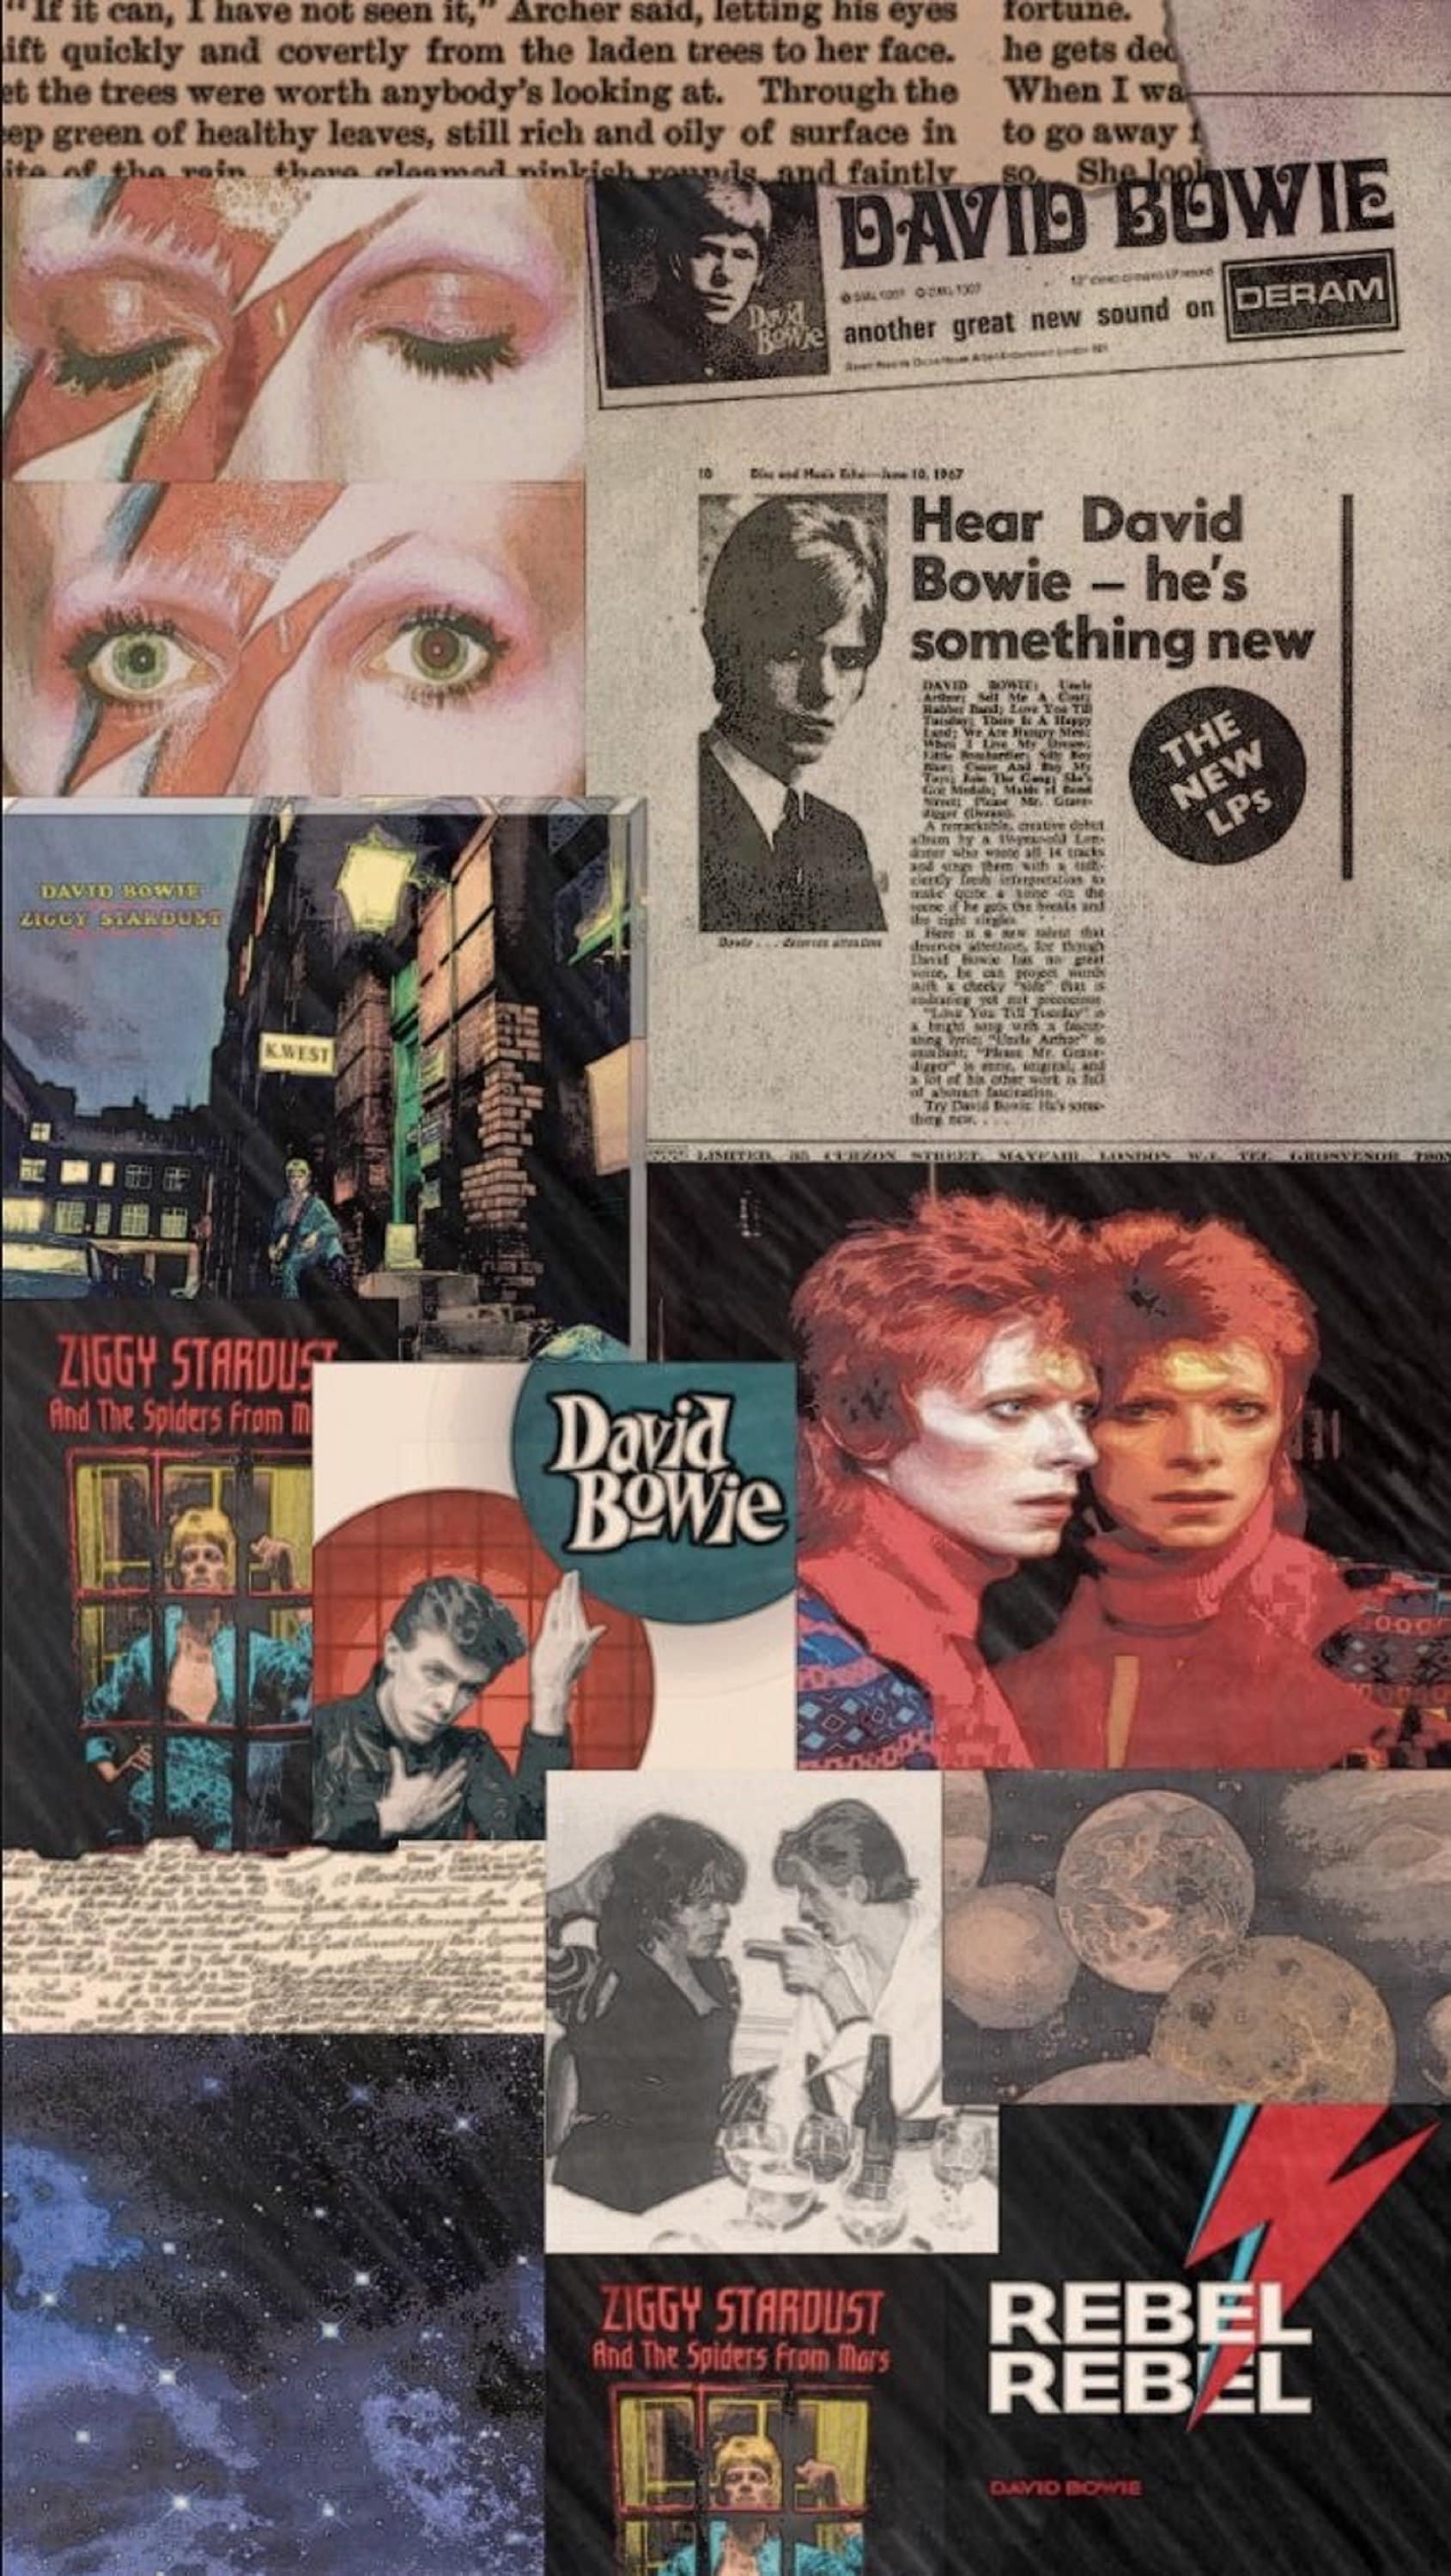 A collage of David Bowie's album covers and newspaper articles - David Bowie